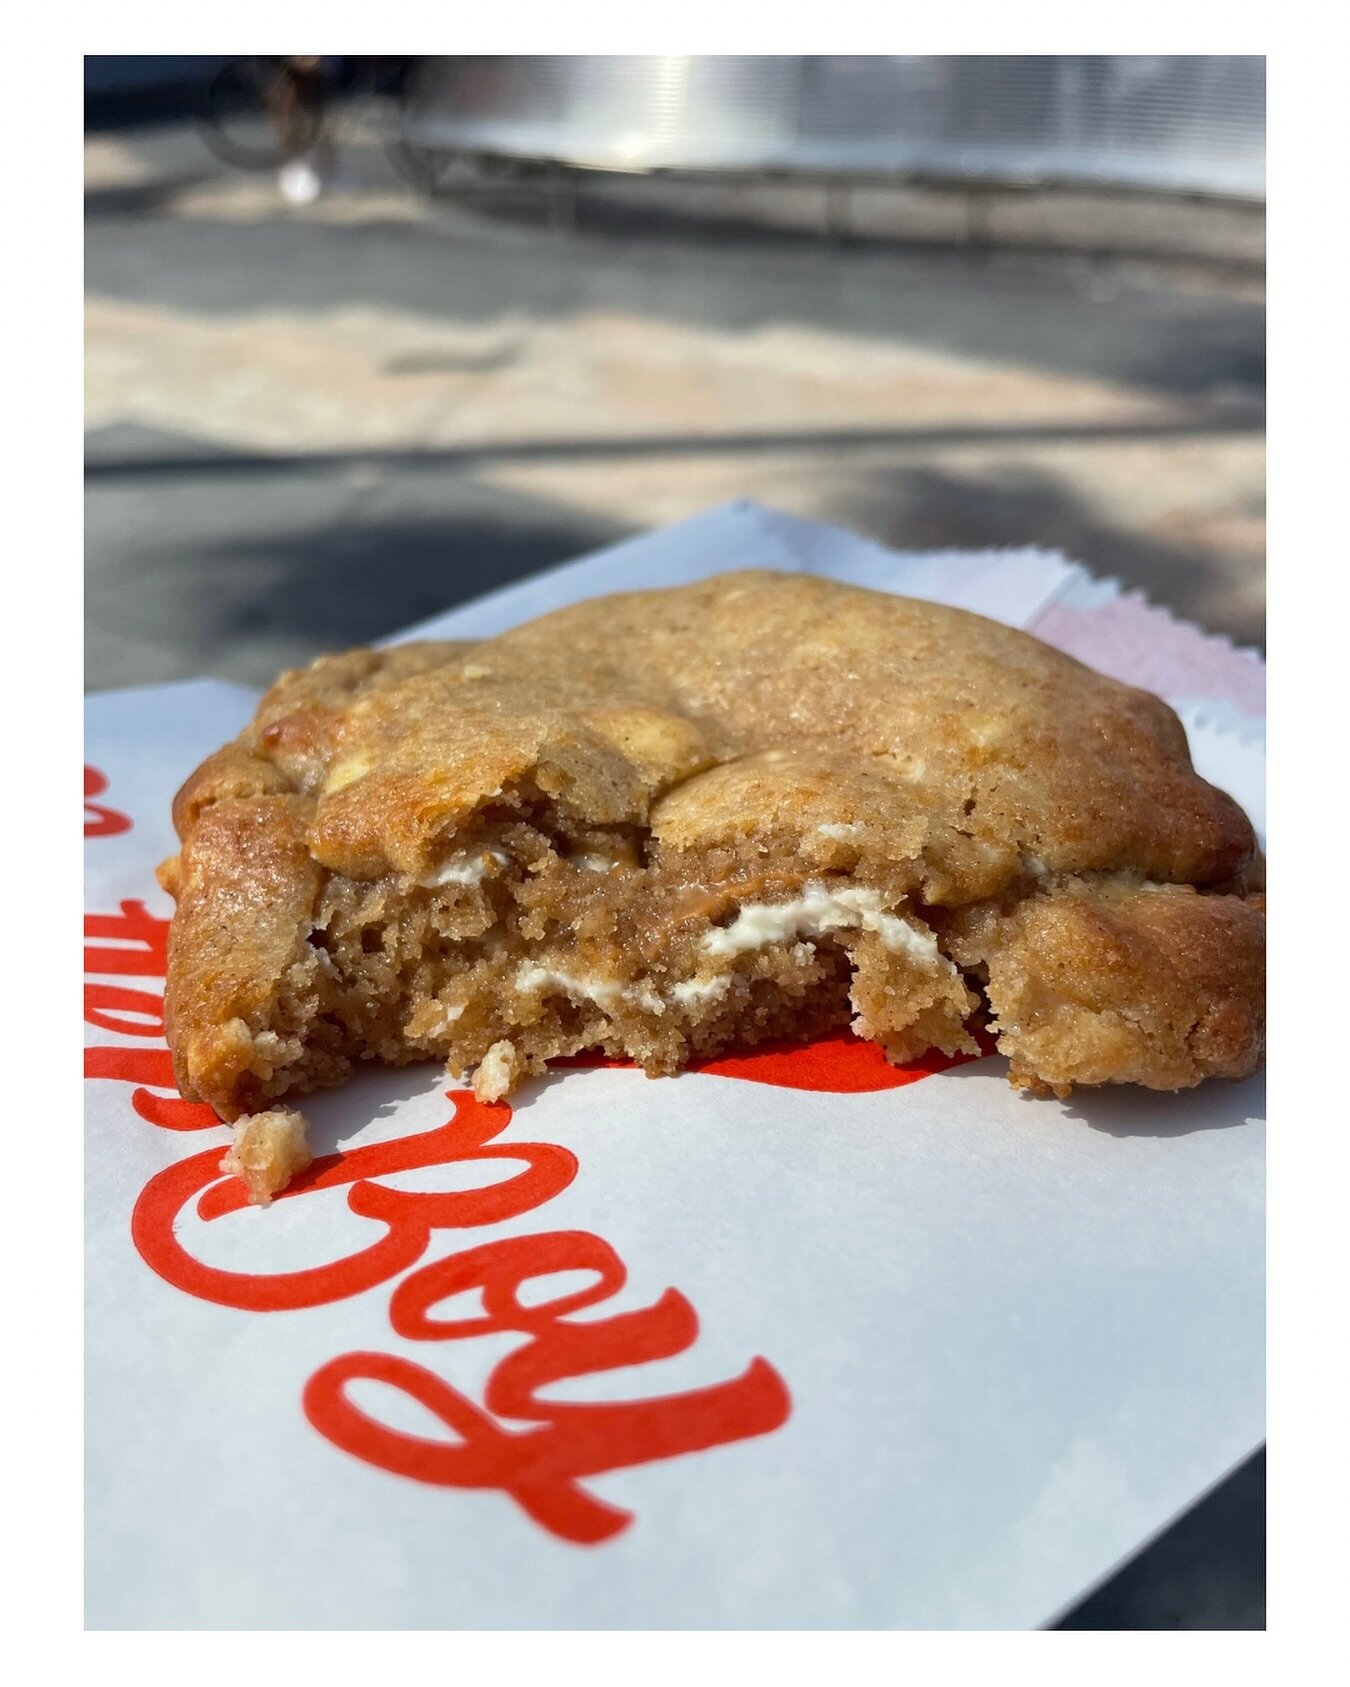 I don&rsquo;t have much of a sweet tooth, but I think I&rsquo;ve eaten my ultimate cookie. This is the snickerdoodle cookie from @butterboybake in Manly and I had it hot and fresh and it was INCREDIBLE! 

This cinnamon spiced cookie had harder bits a